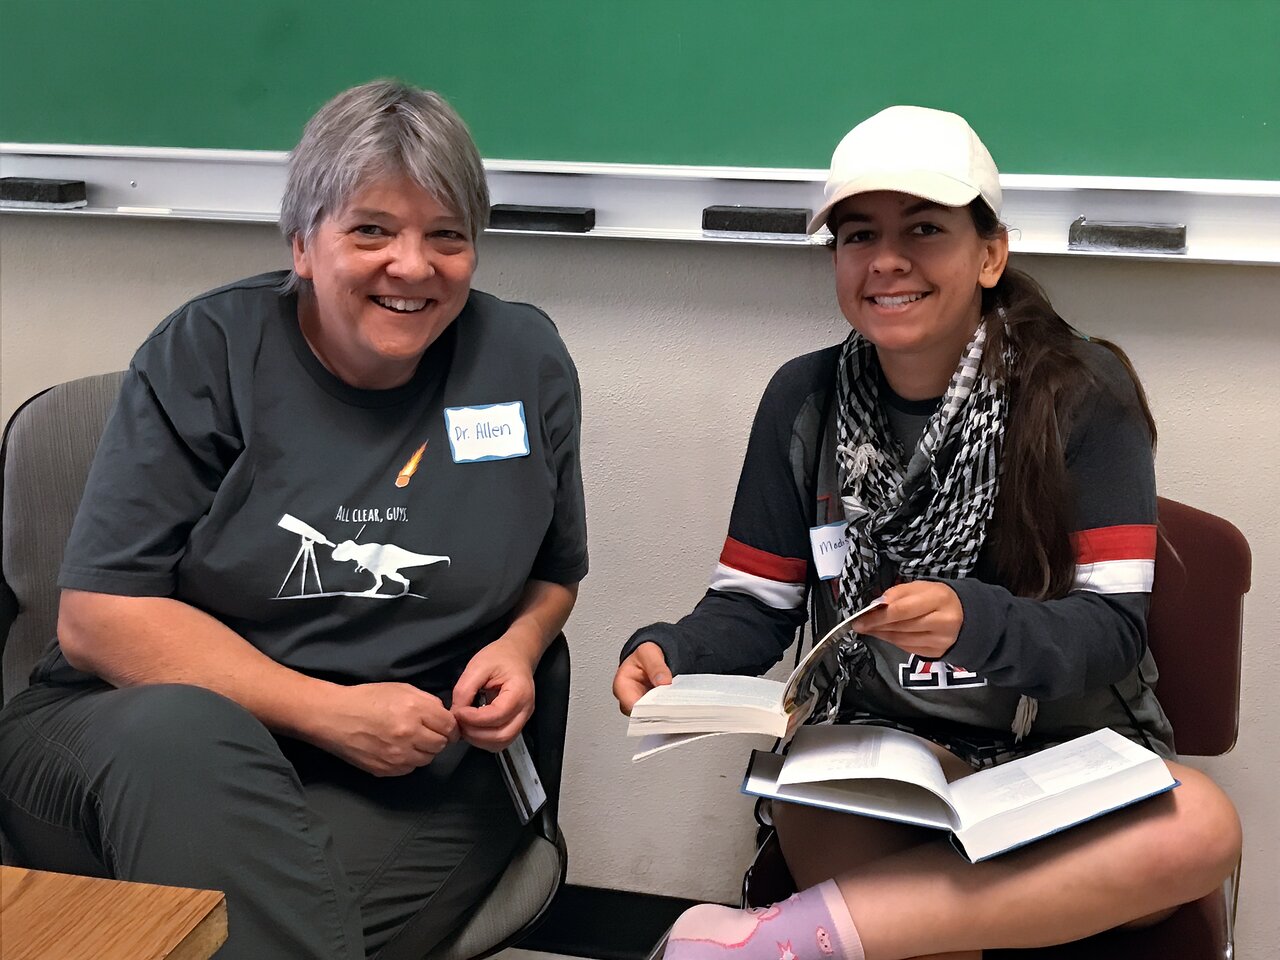 NOIRLab’s Dr Lori Allen (left), Associate Director of Kitt Peak Observatory, giving up some of her time to work with high-school students at a Teen Astronomy Café